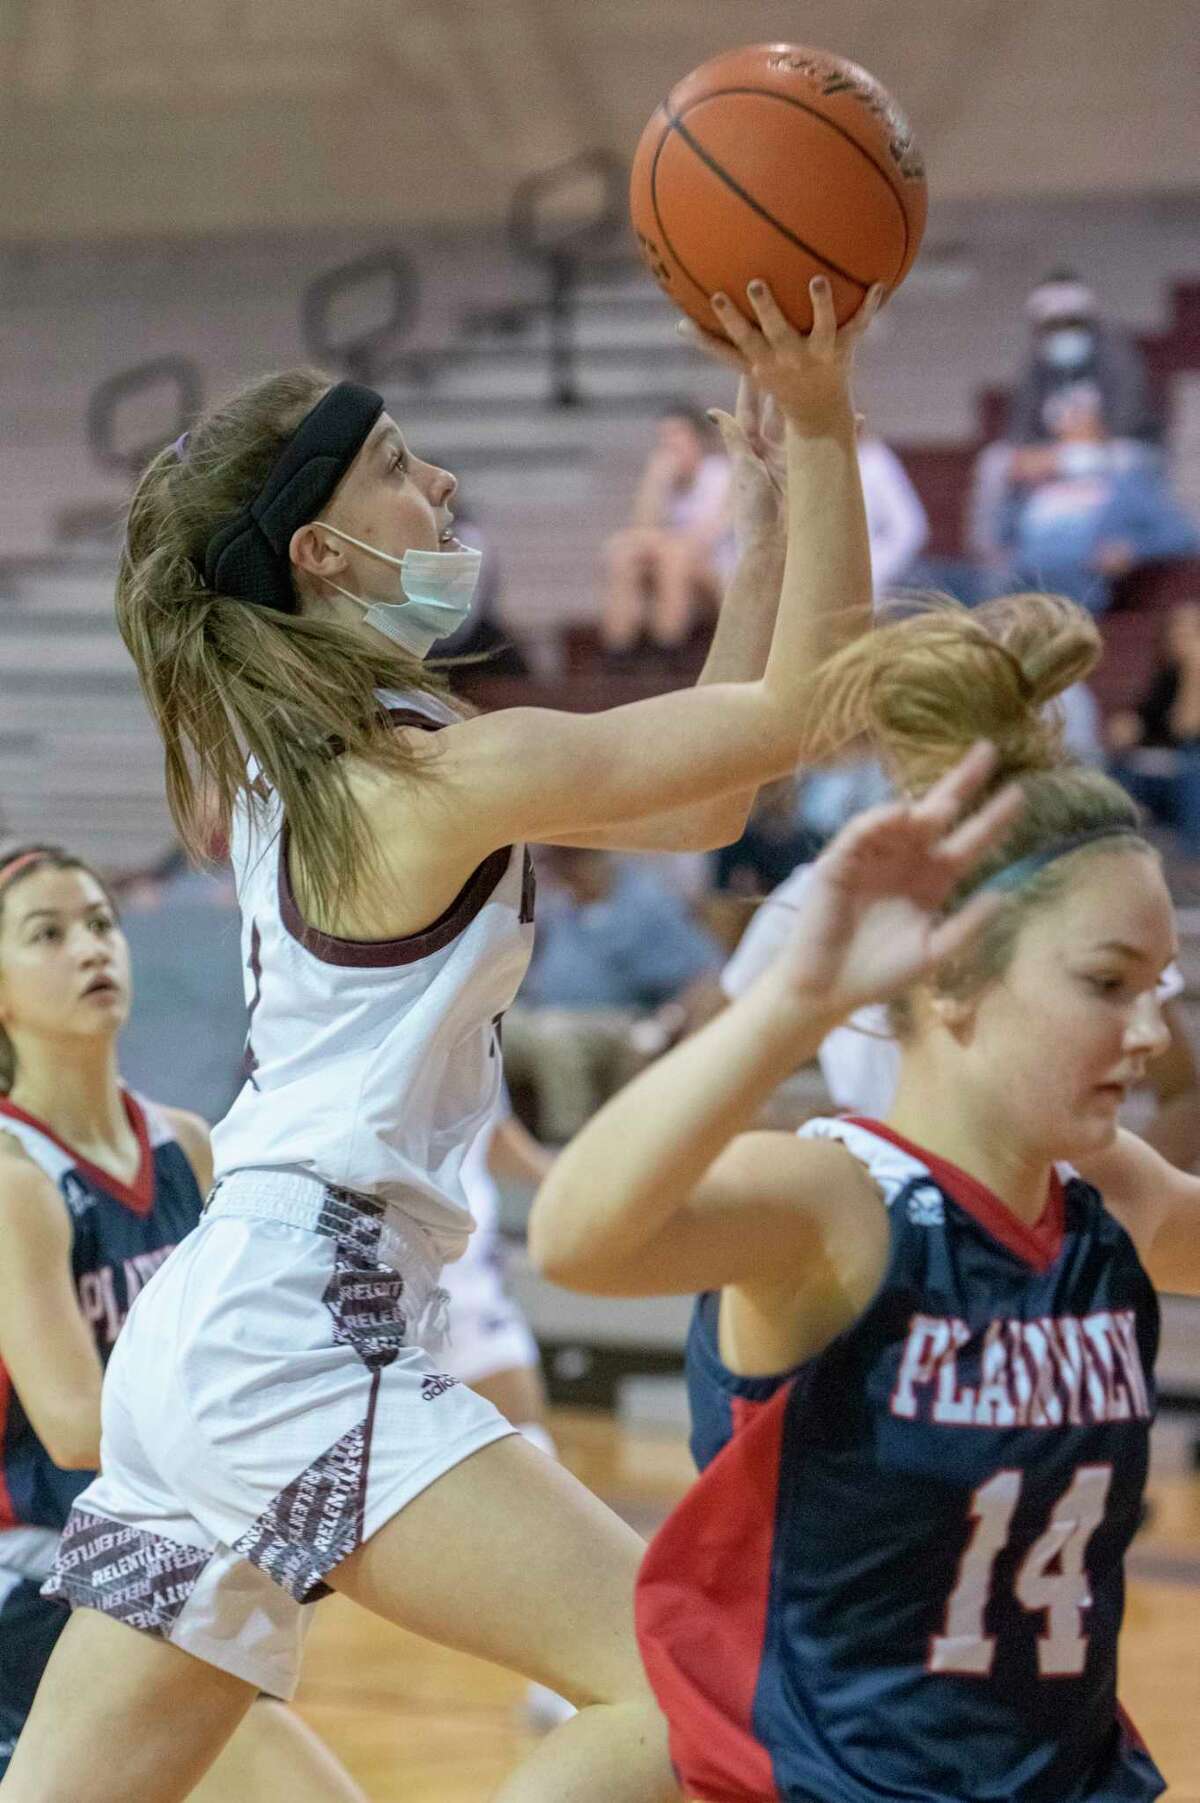 Lee High's Maggie Erdwurm drives to the basket as Plainview's Katy Long runs past 12/29/2020 at the Lee High gym. Tim Fischer/Reporter-Telegram